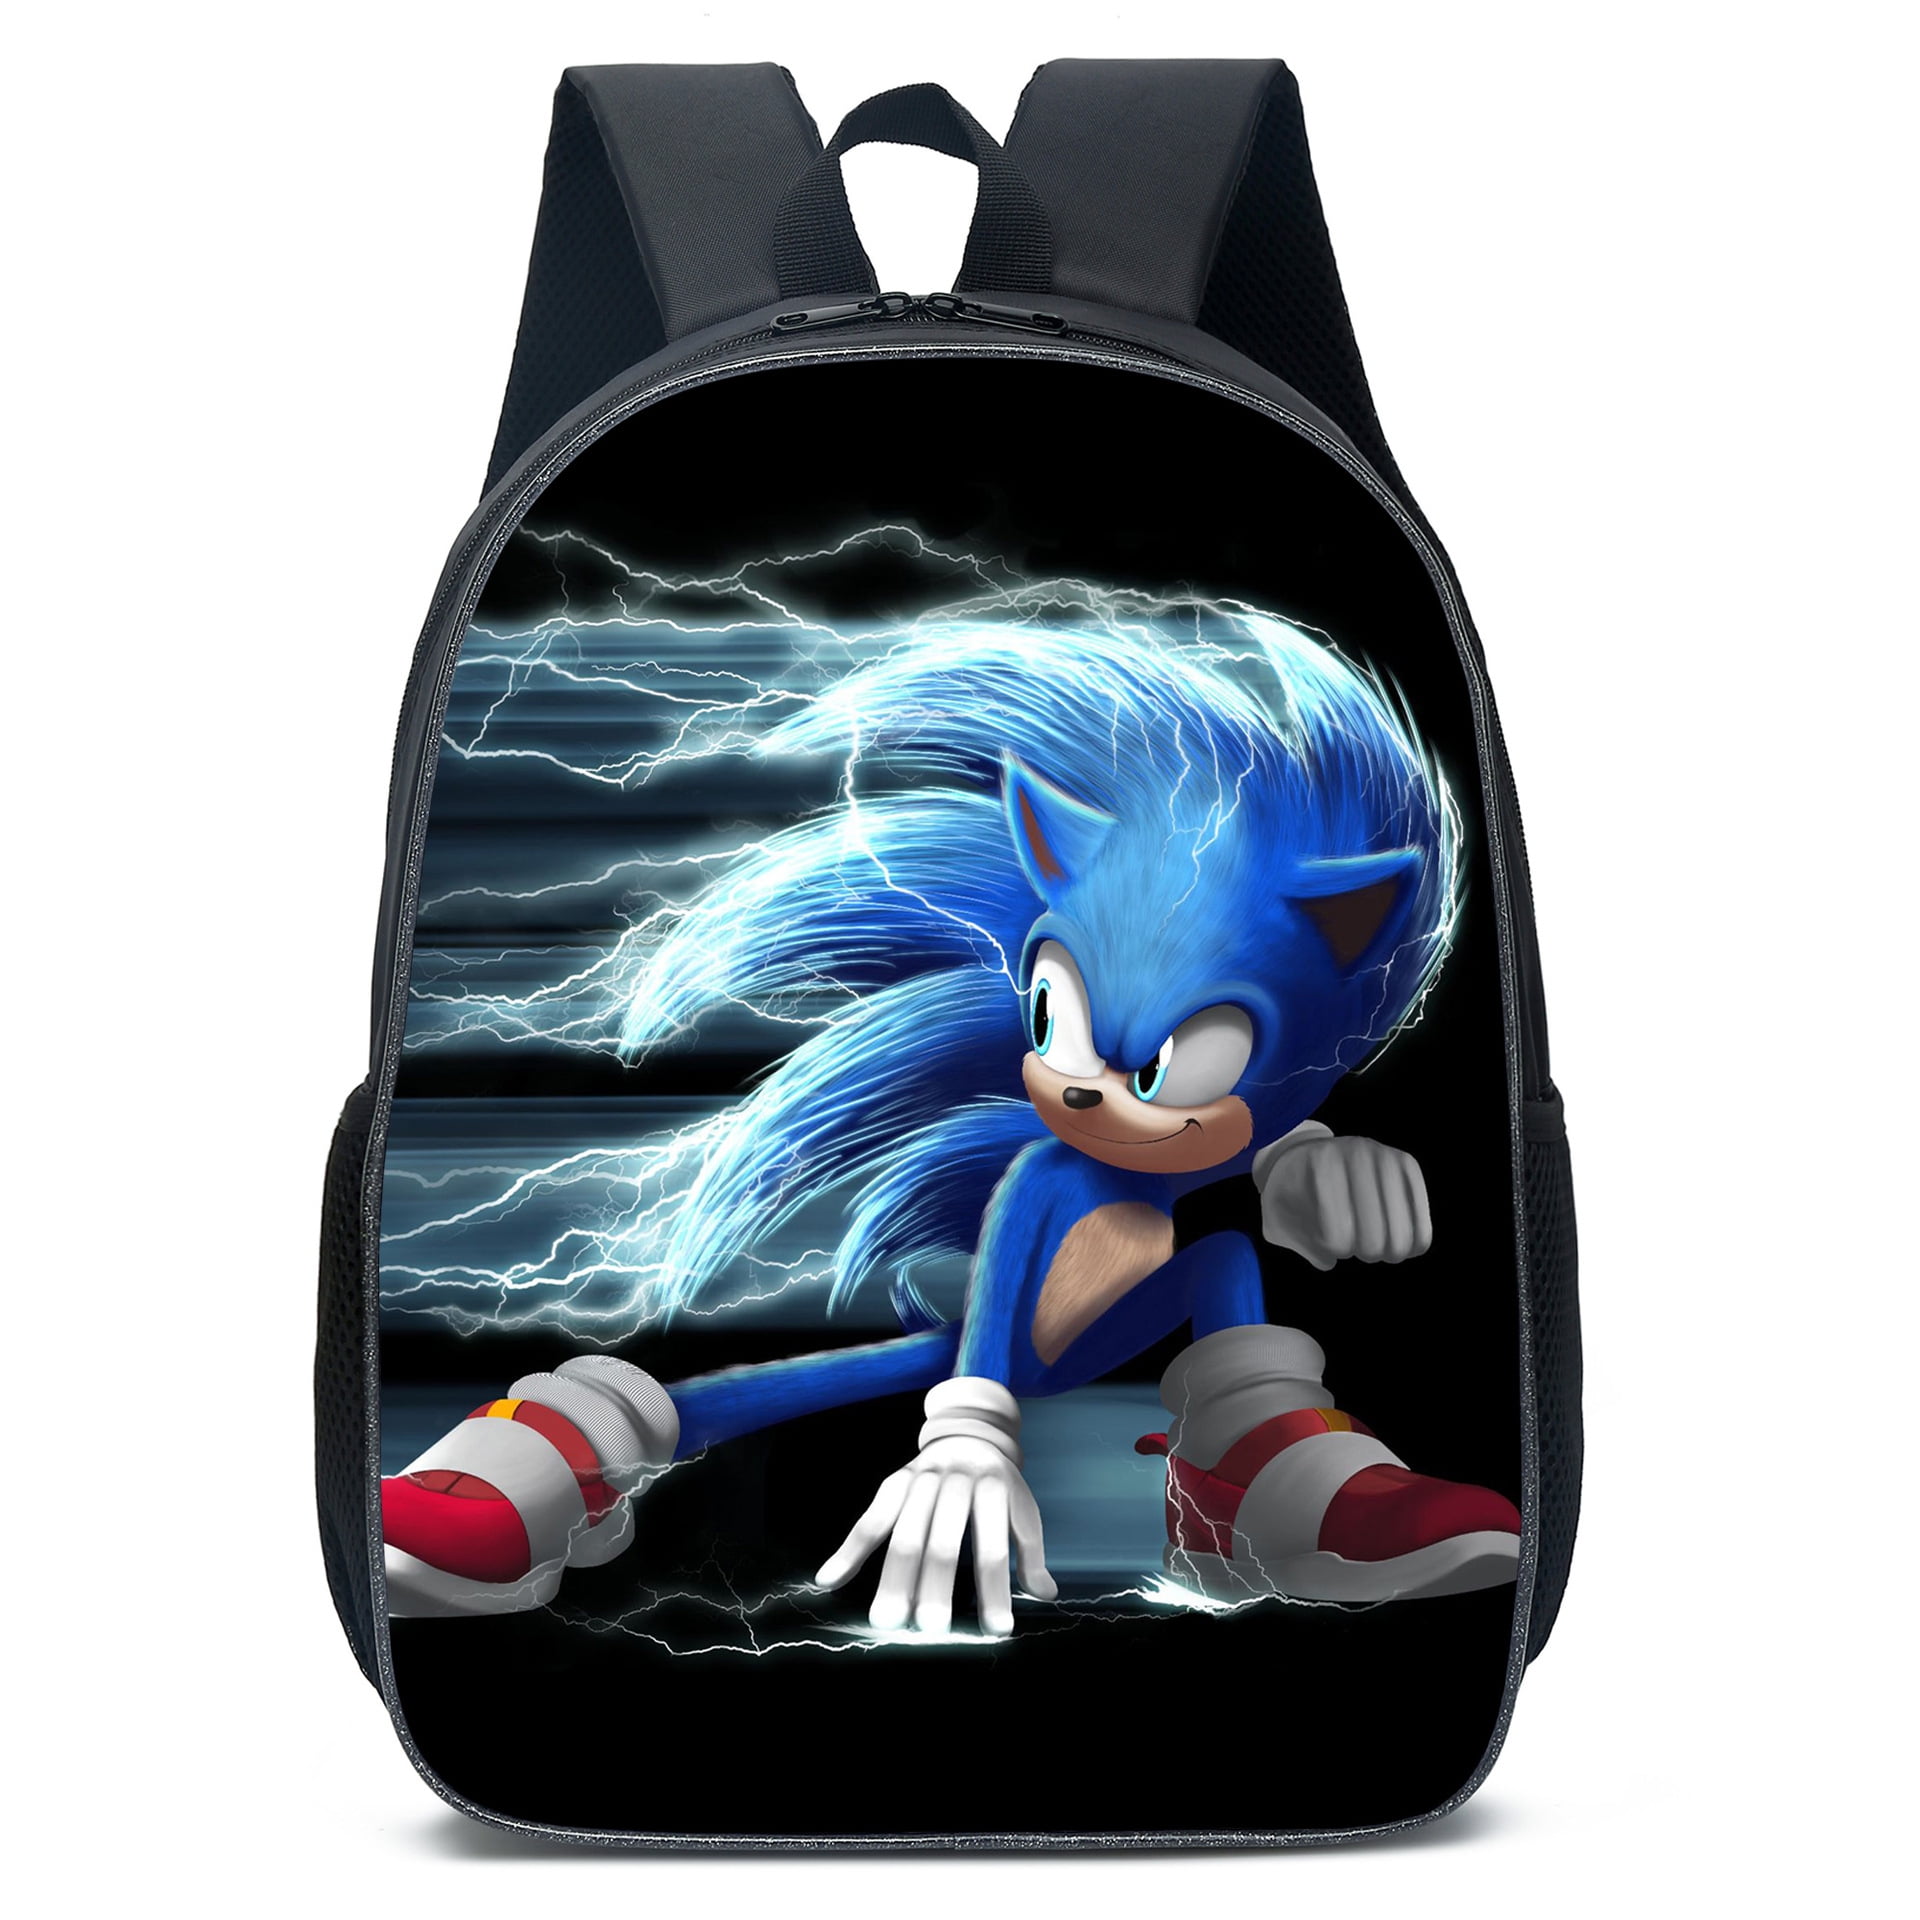 Sonic Let's Do This 16" inches Large School Backpack BRAND NEW 